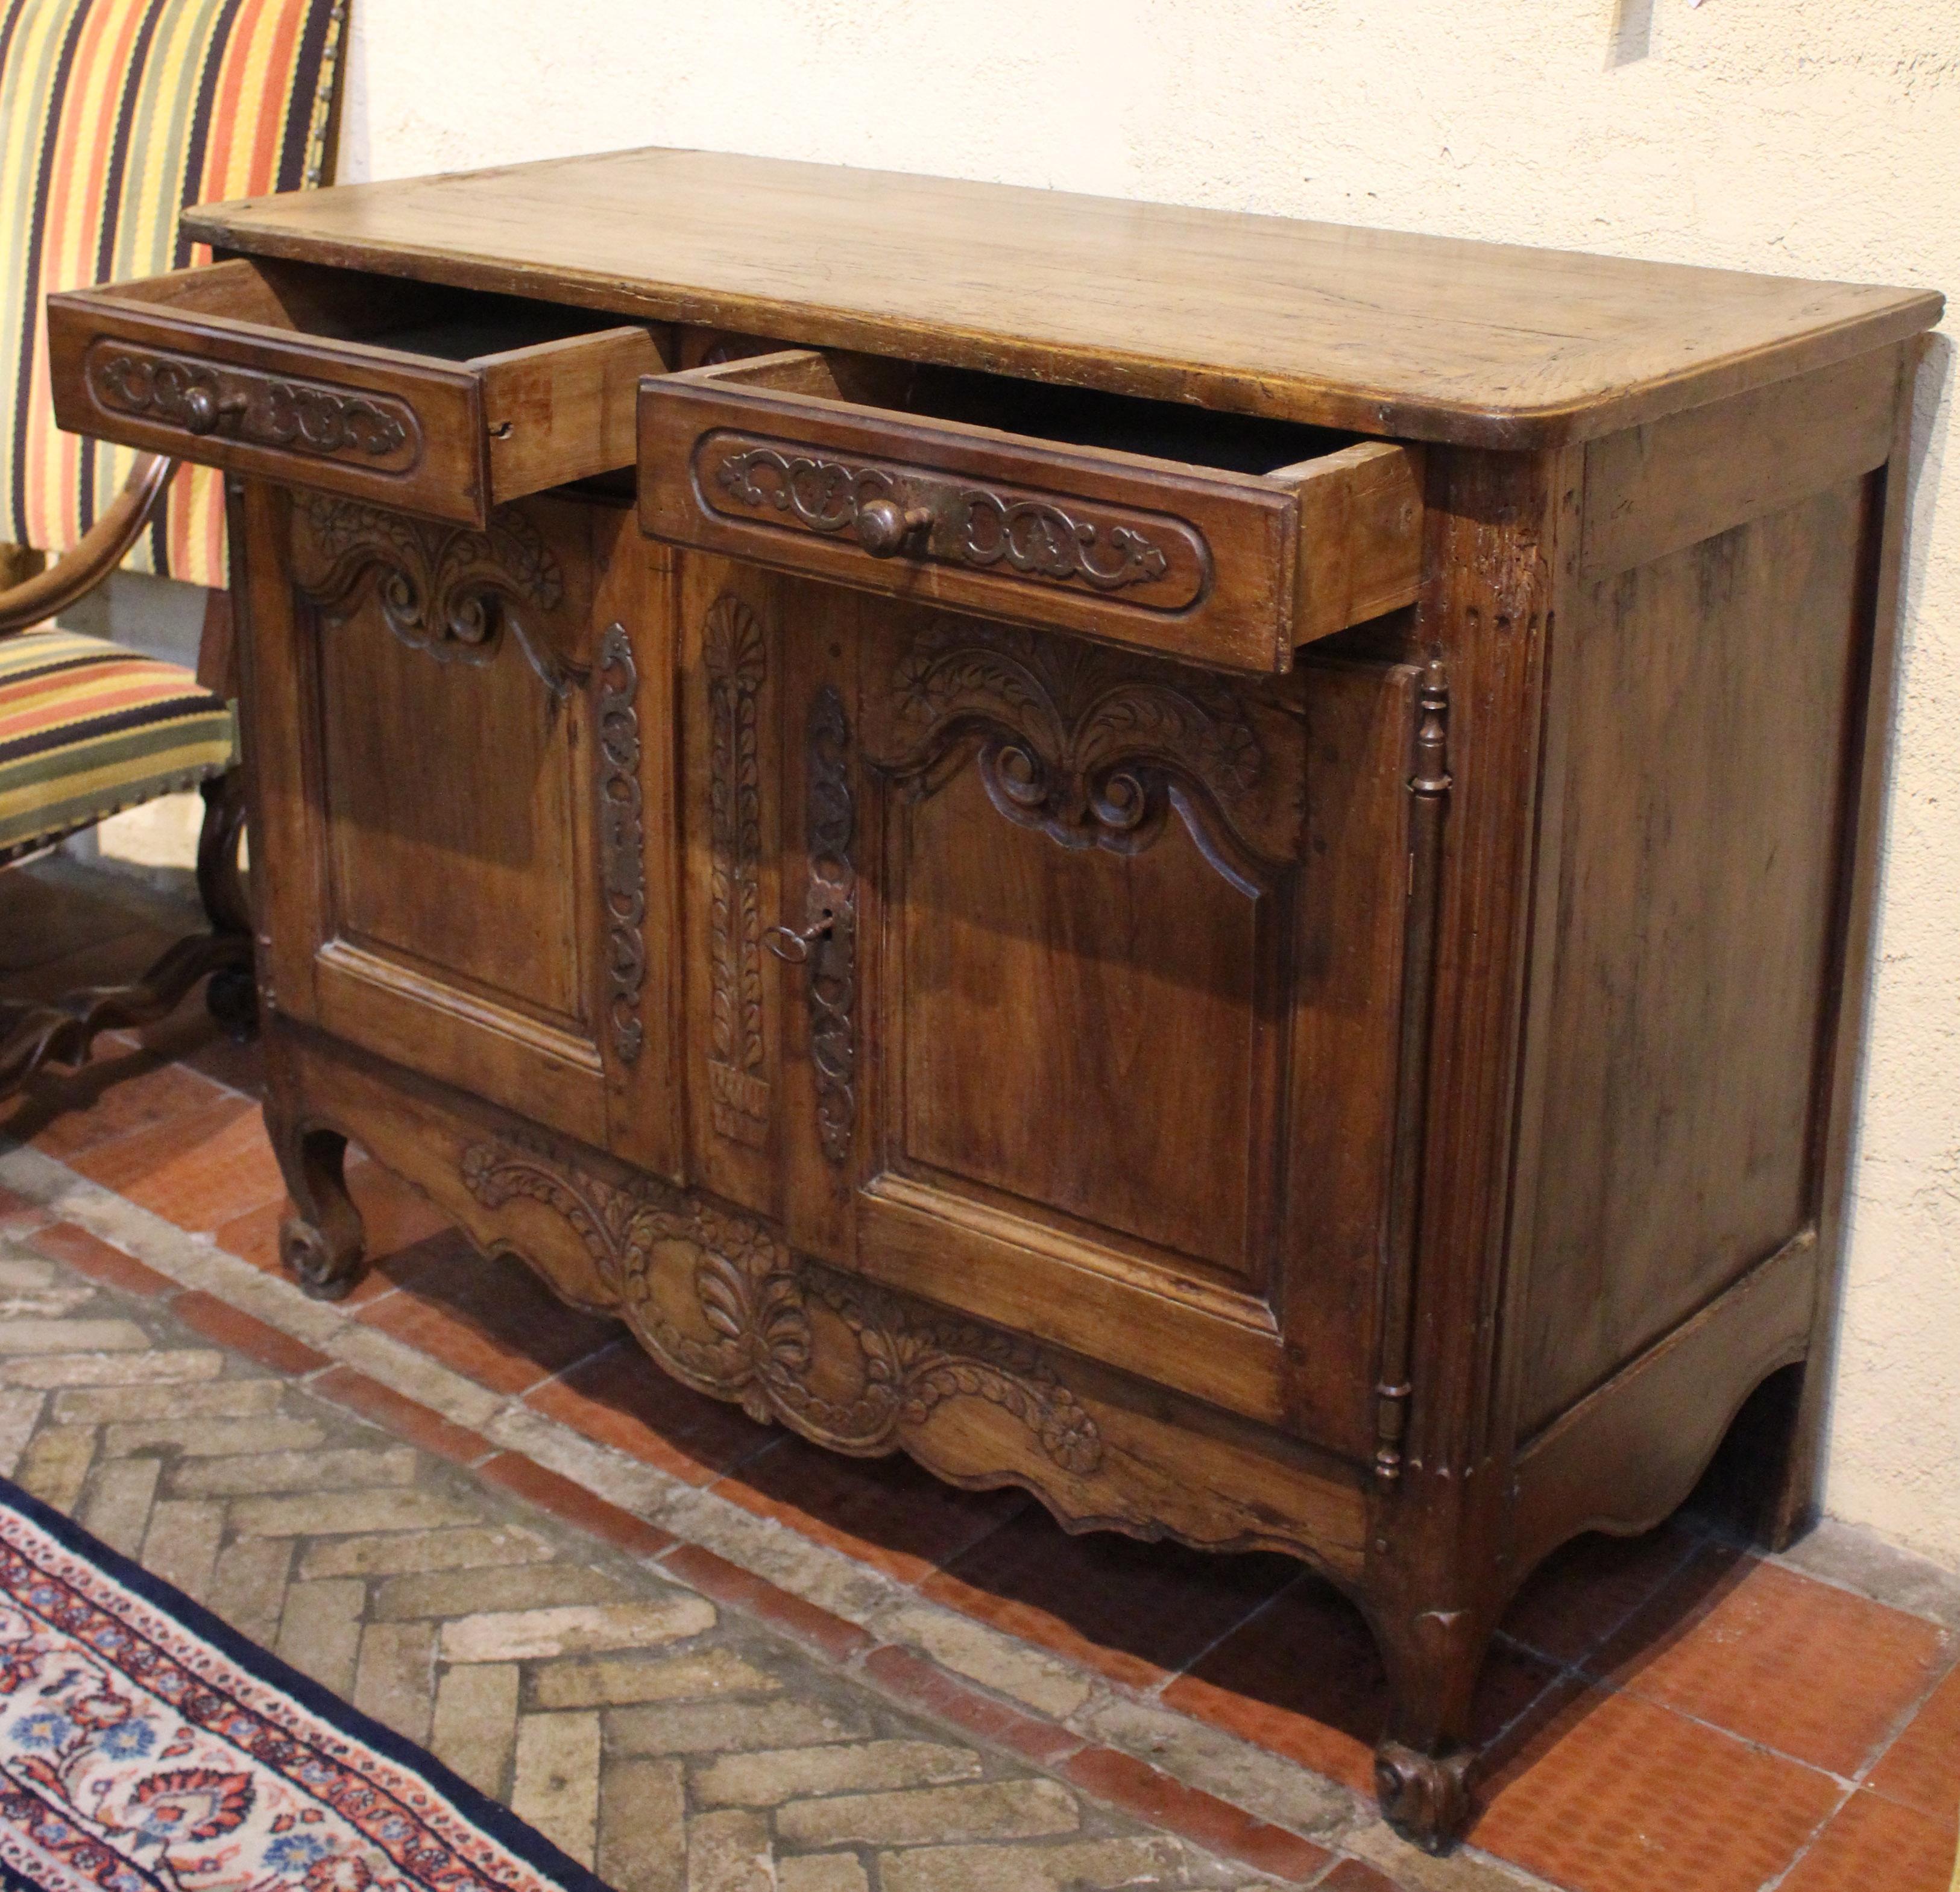 Late 18th century country French buffet. Original steel hardware & escutcheons. Cherry & poplar. Two drawers over two doors. Well carved throughout the front with bold sprays of leaves ending in florets, rosette between the drawers and well shaped